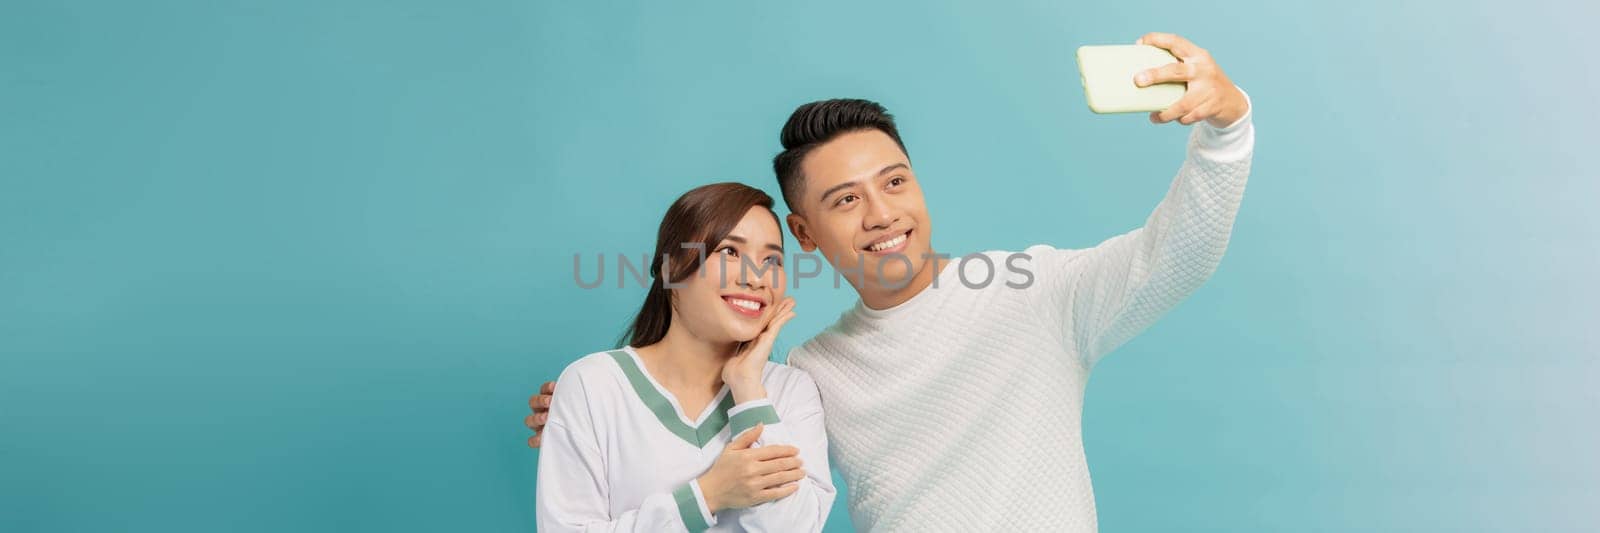 A loving young asian couple hugging while standing together and taking a selfie on banner